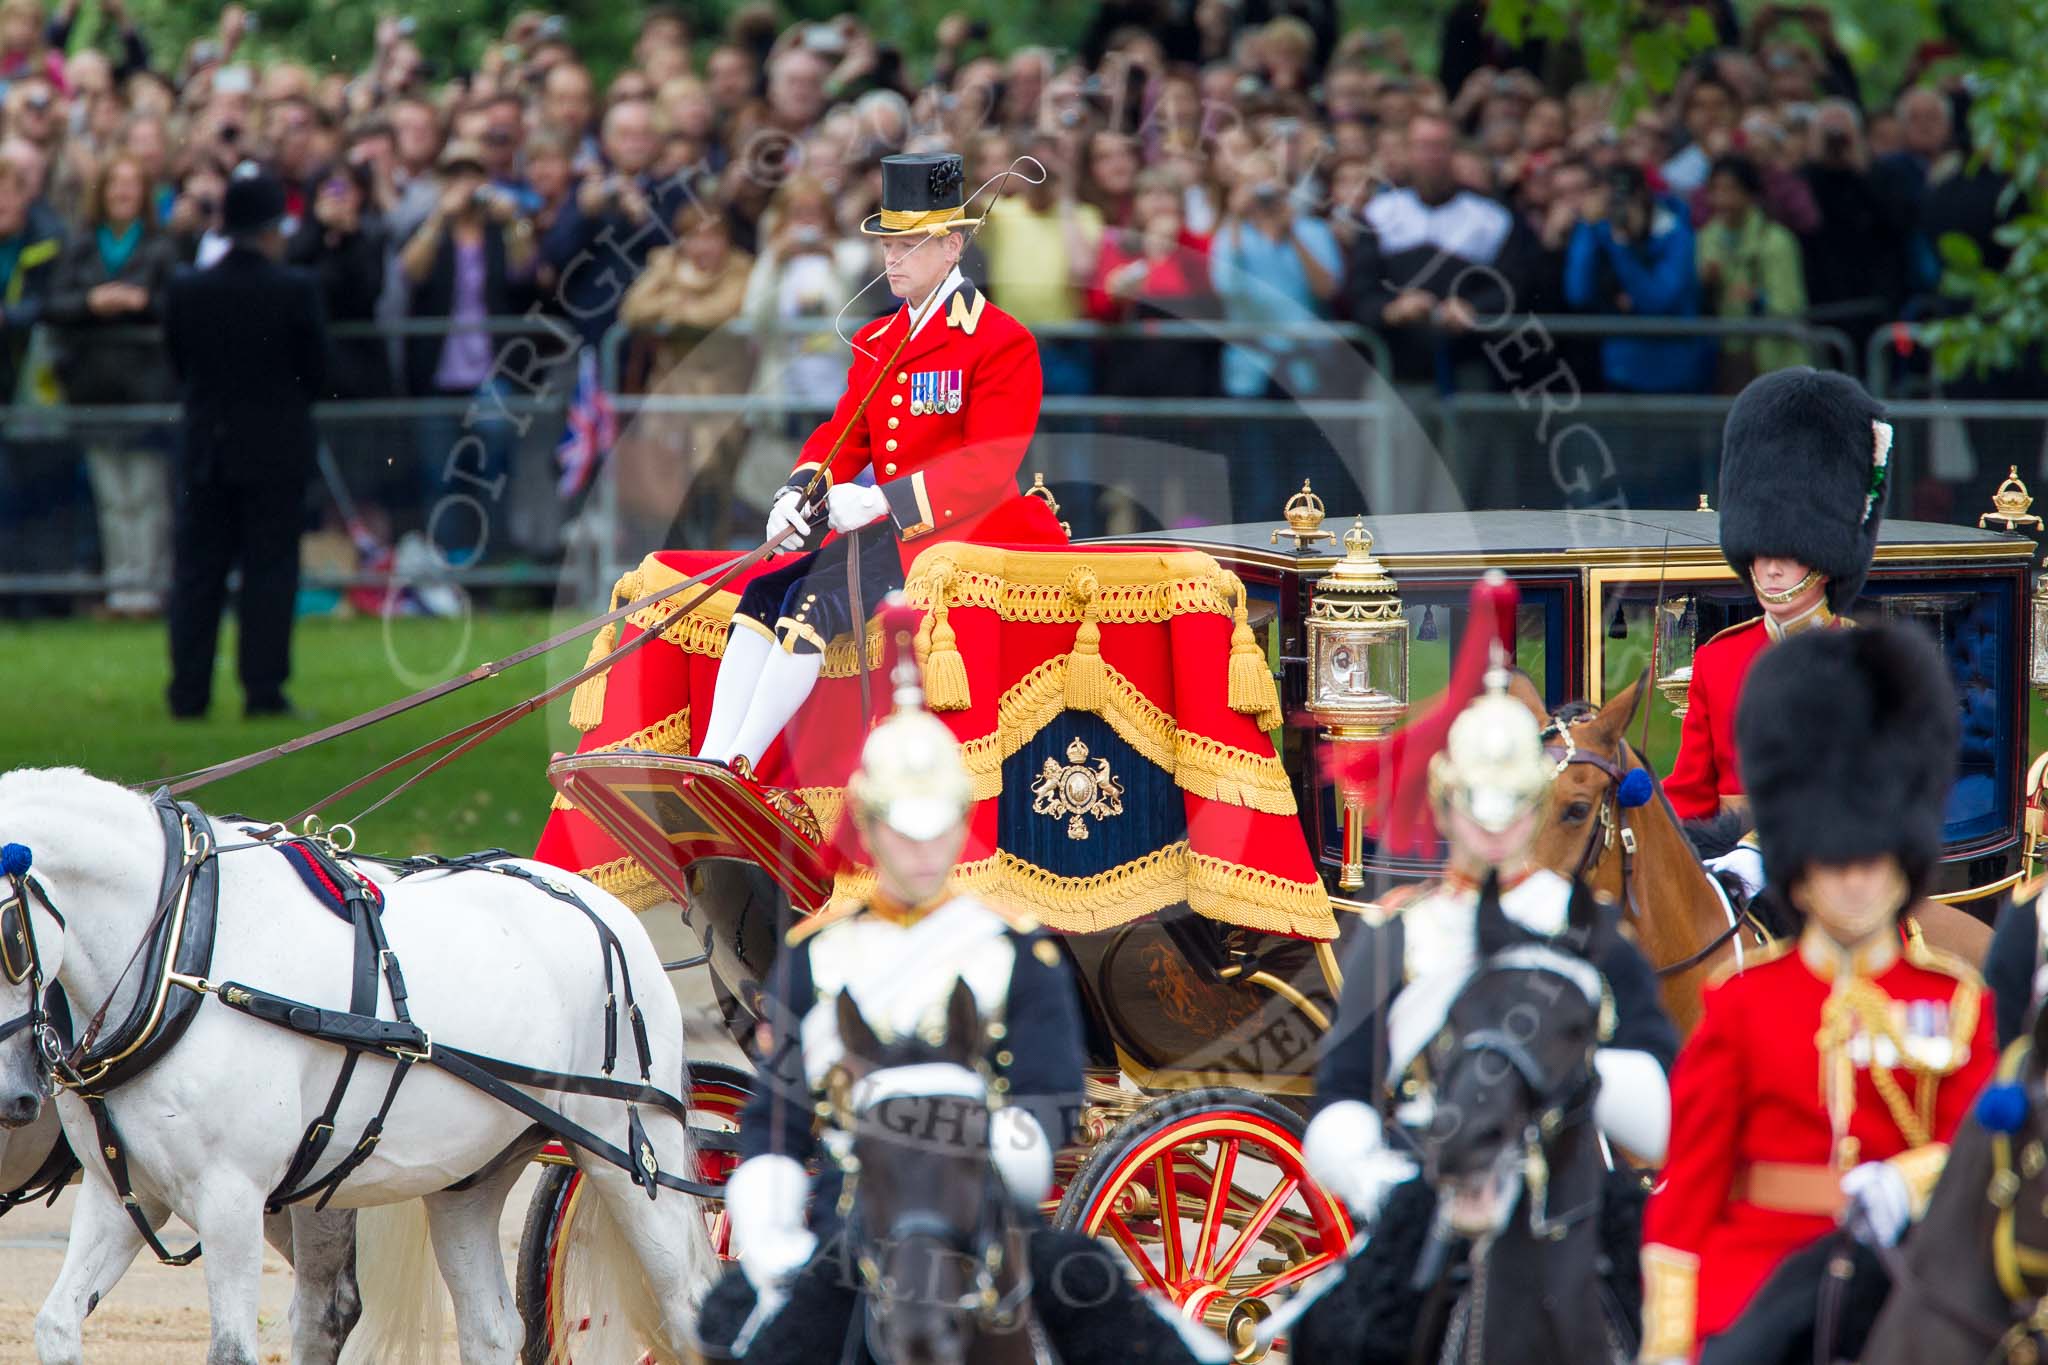 Trooping the Colour 2012: The Inspection of the Line - The Glass Coach turning back onto Horse Guards Parade, passing the Major of the Parade (on the very right)..
Horse Guards Parade, Westminster,
London SW1,

United Kingdom,
on 16 June 2012 at 11:06, image #233